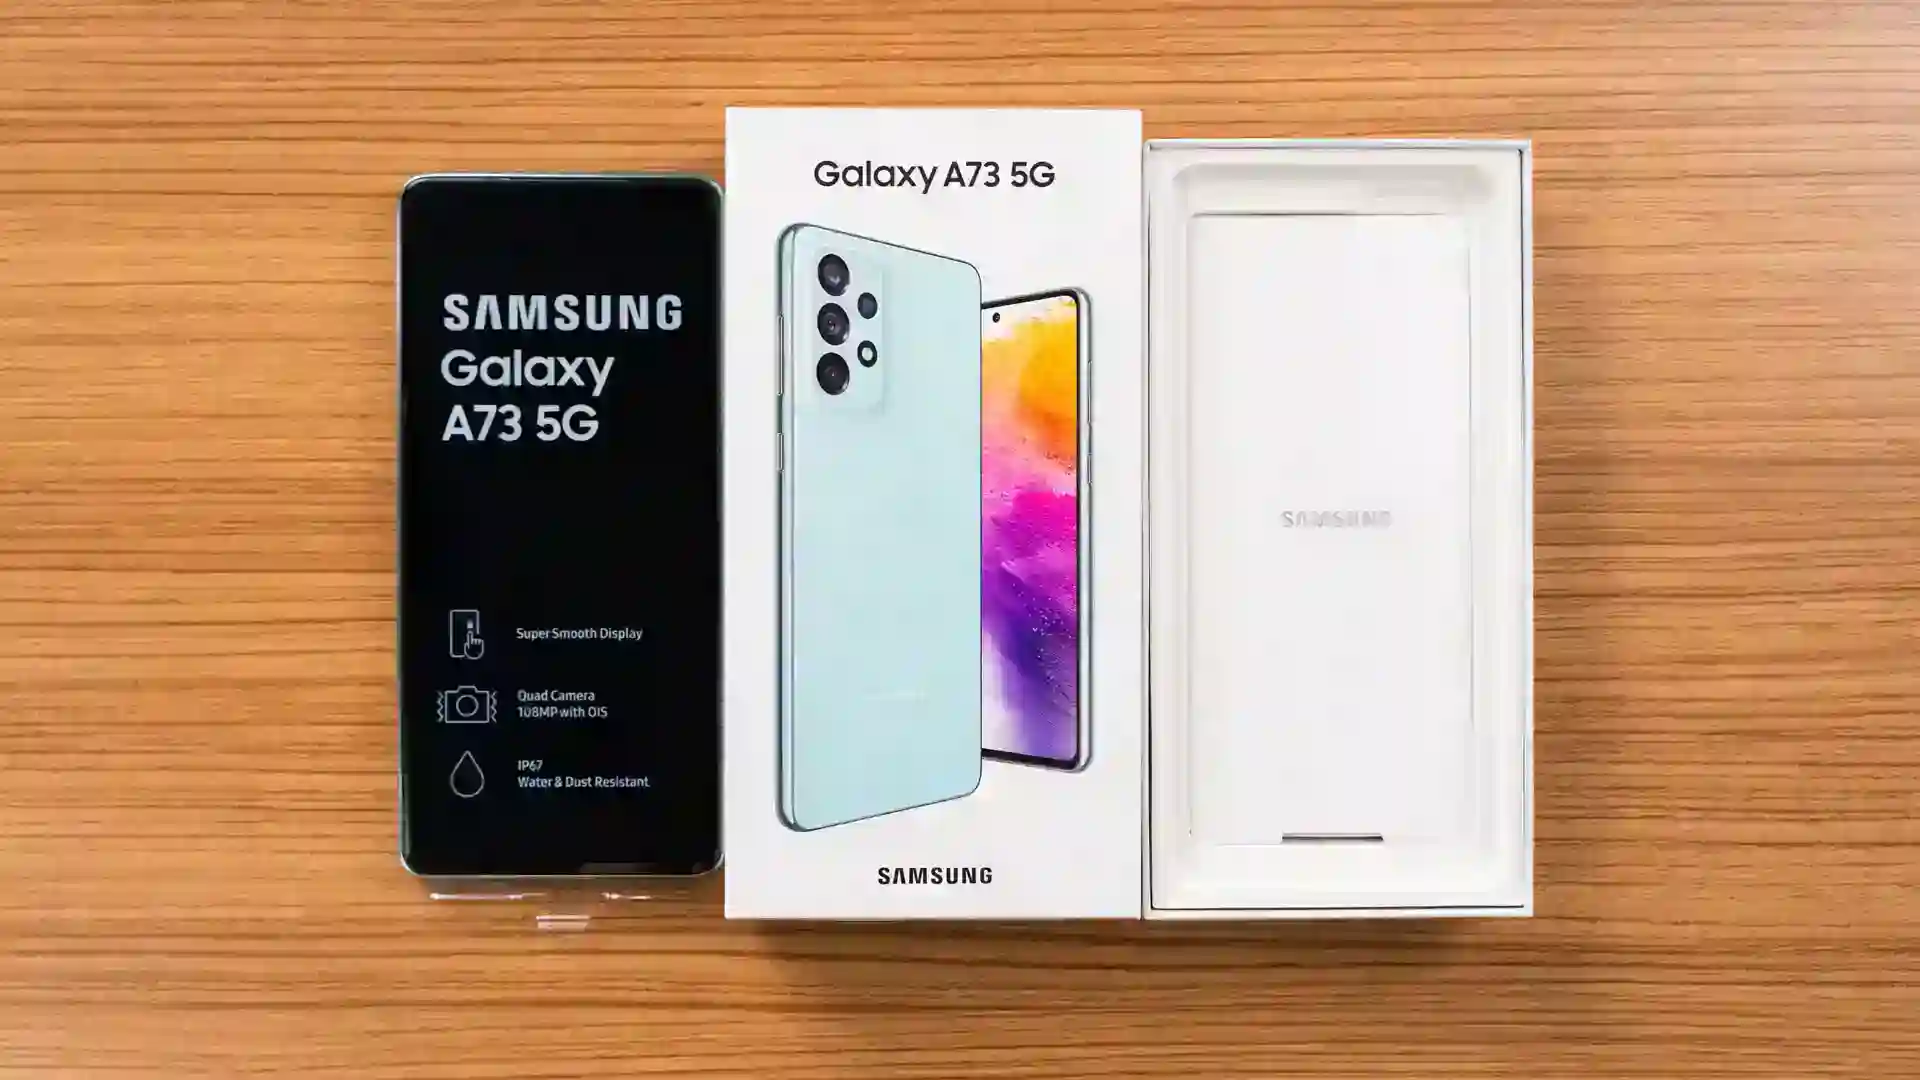 Samsung Galaxy A73 "5G" {Boxed and Sealed}